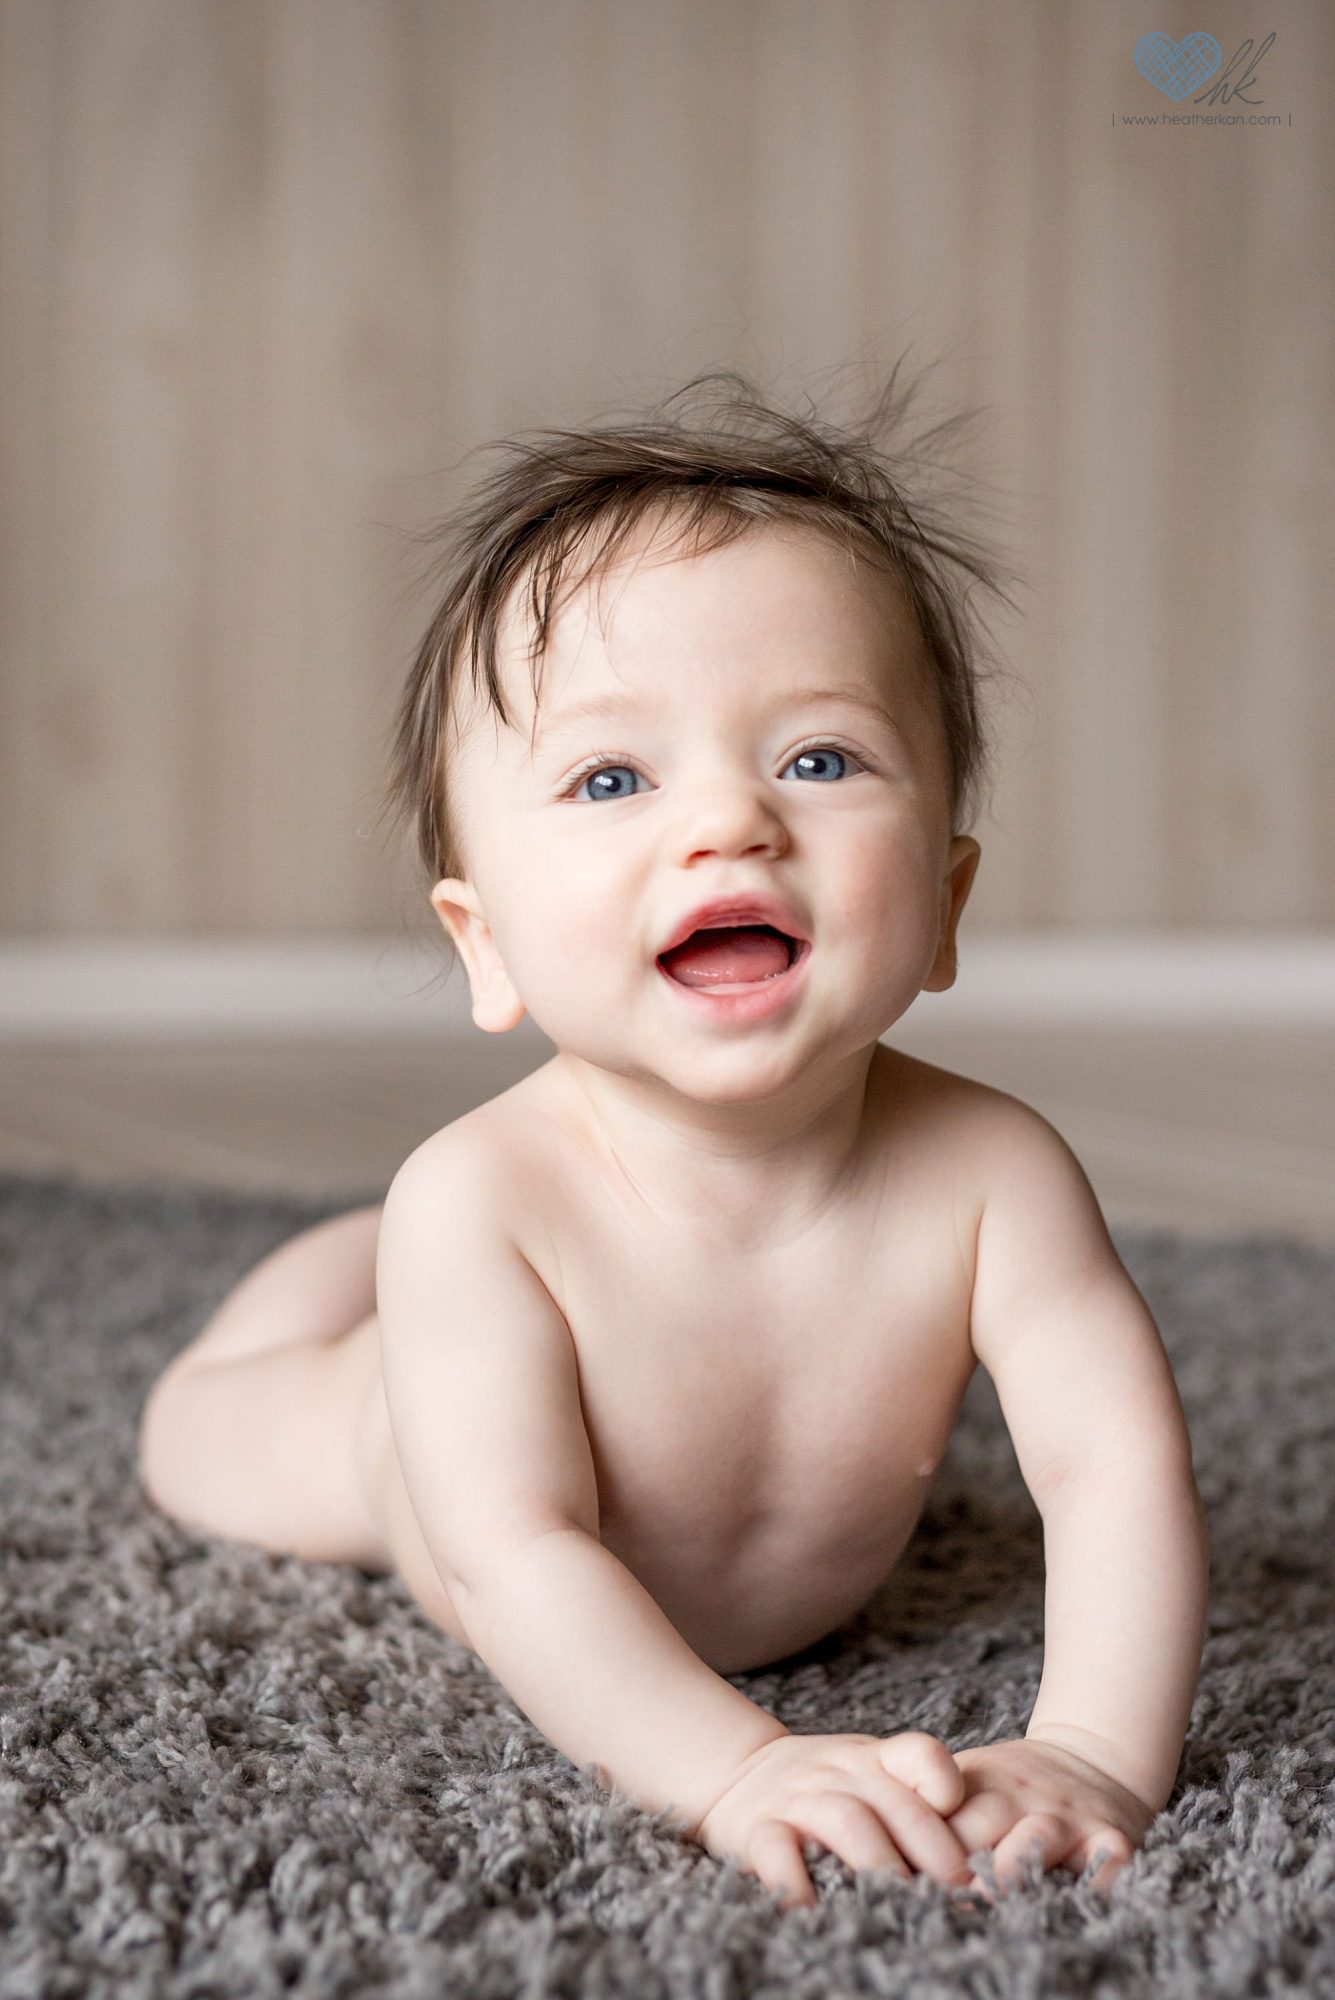 6 month old laughing photograph